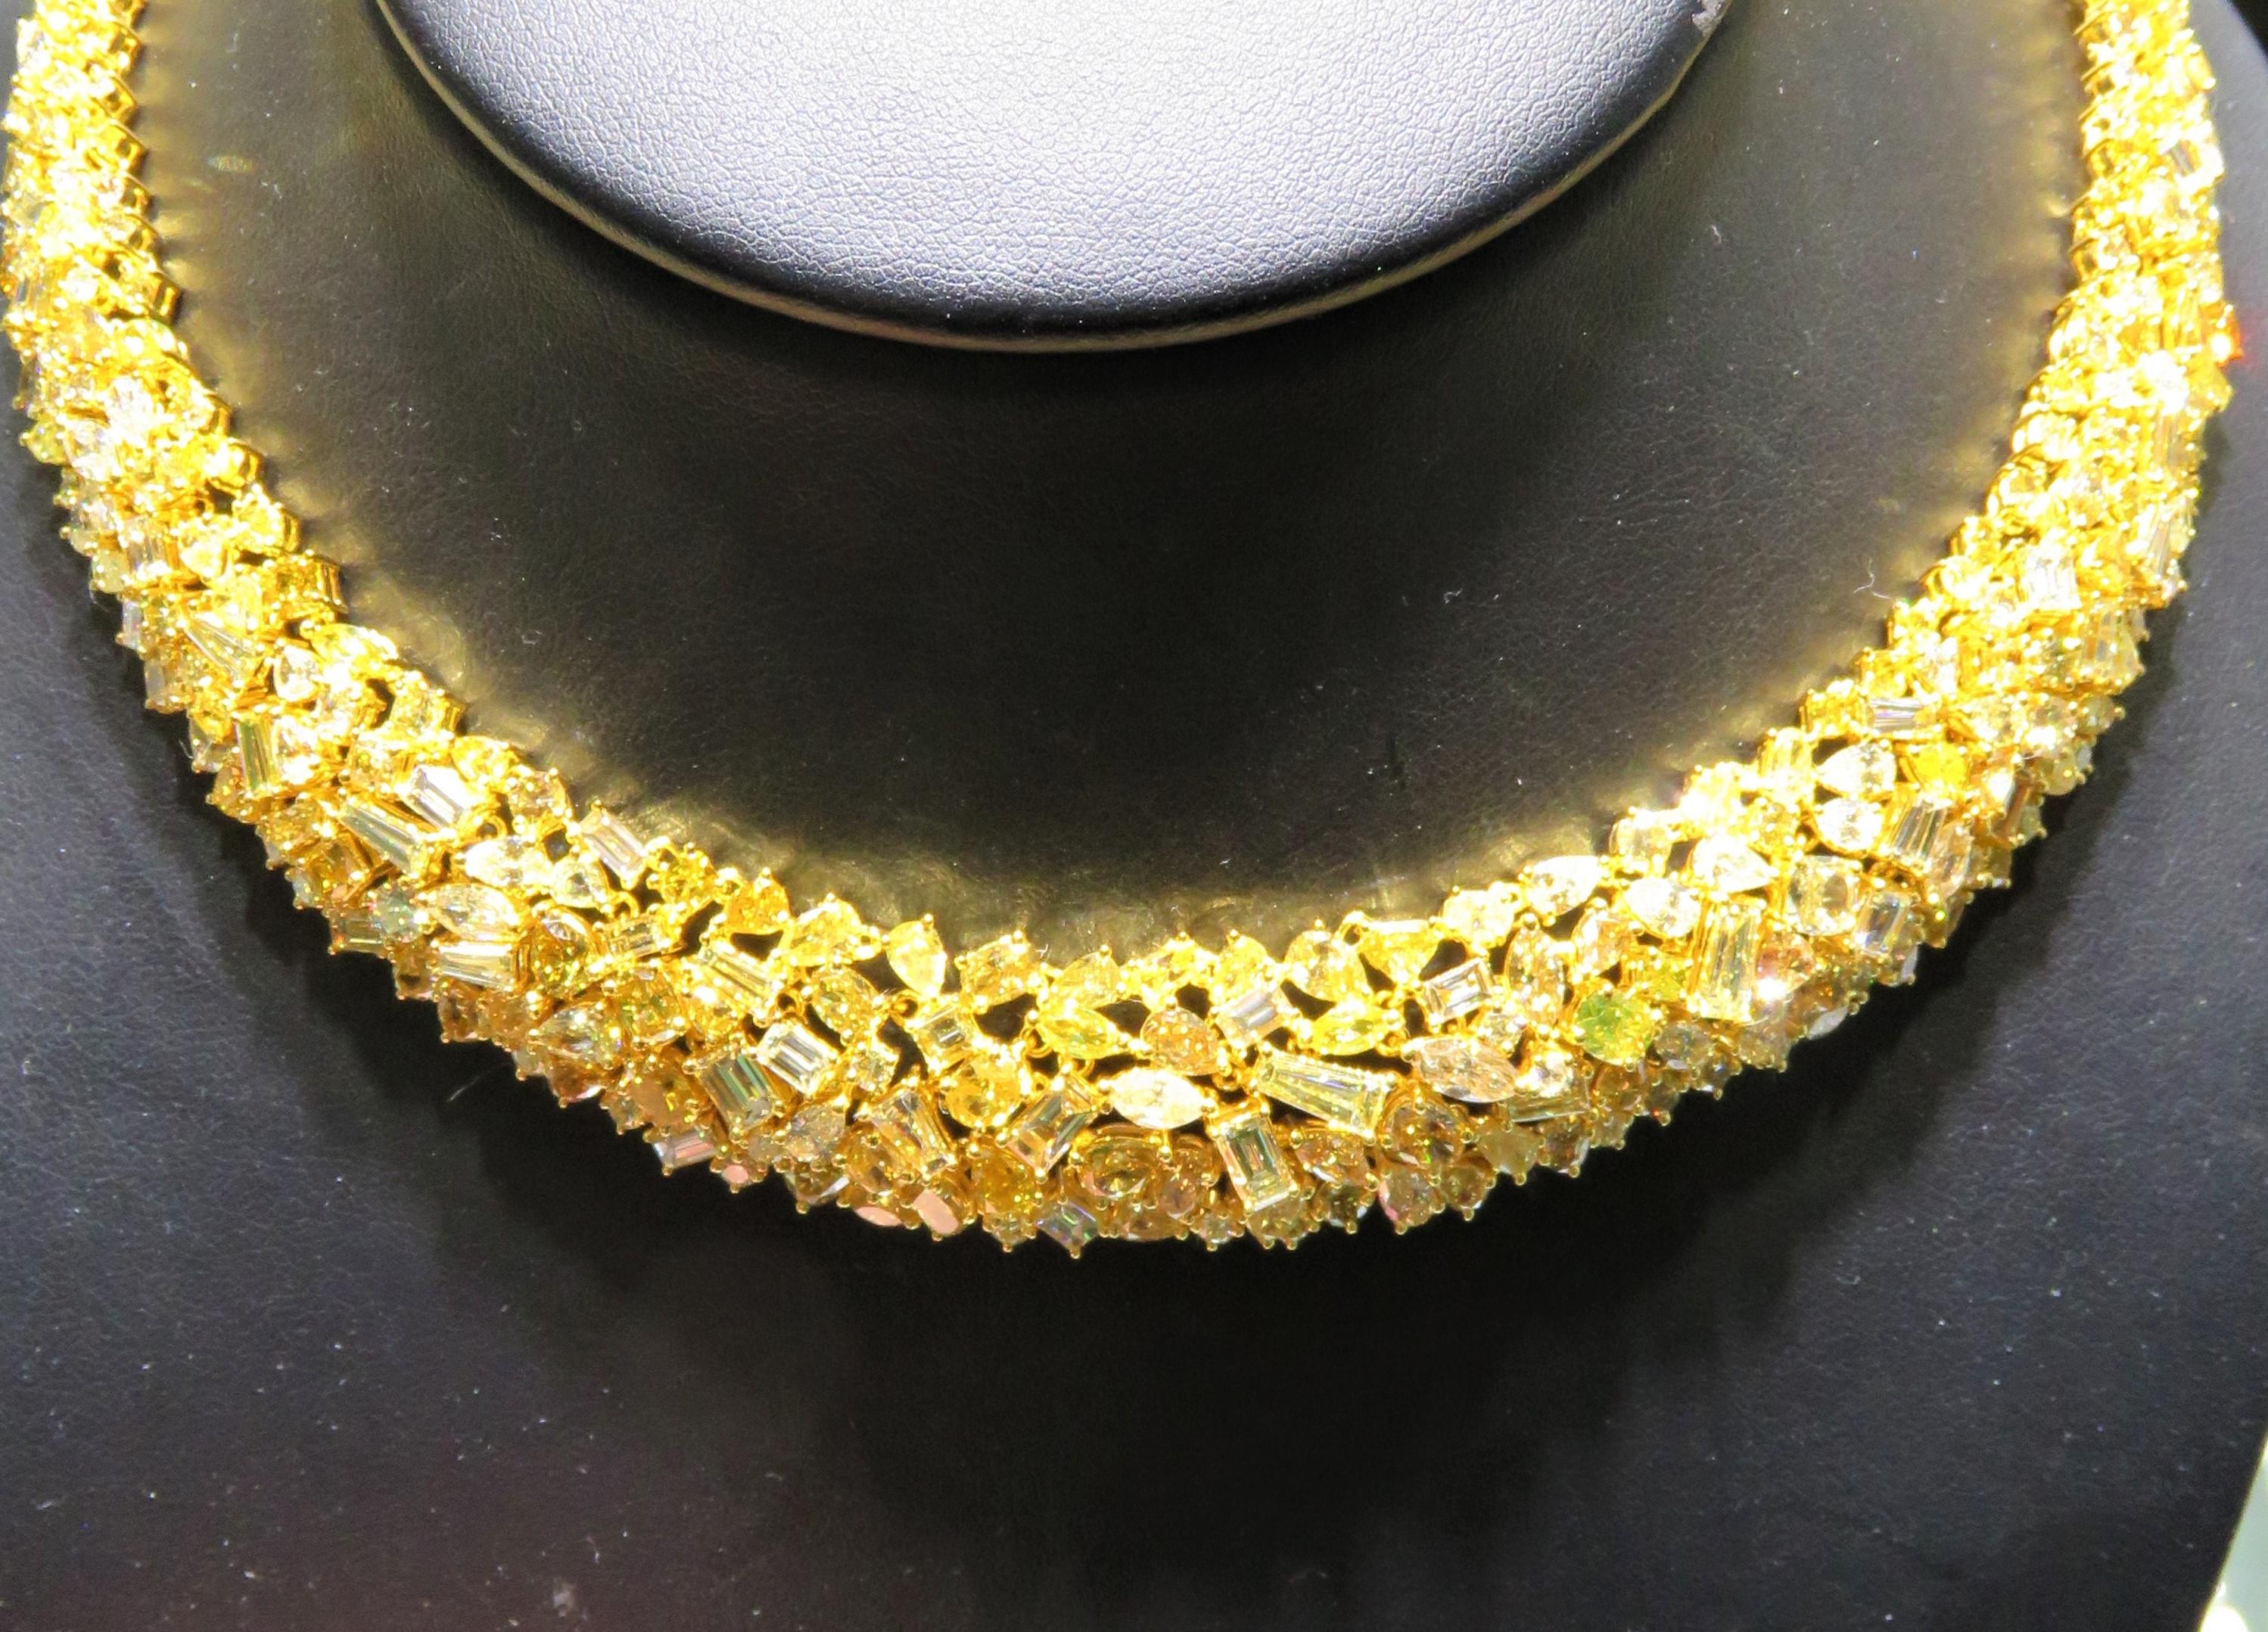 The Following Item we are offering is a Rare Important Radiant 18KT Gold Fancy Yellow Diamond Necklace! This Magnificent Fancy Yellow Diamond Necklace Features Pristine Cut Fancy assorted shades of Fancy Yellow Diamonds!! This Gorgeous Necklace from